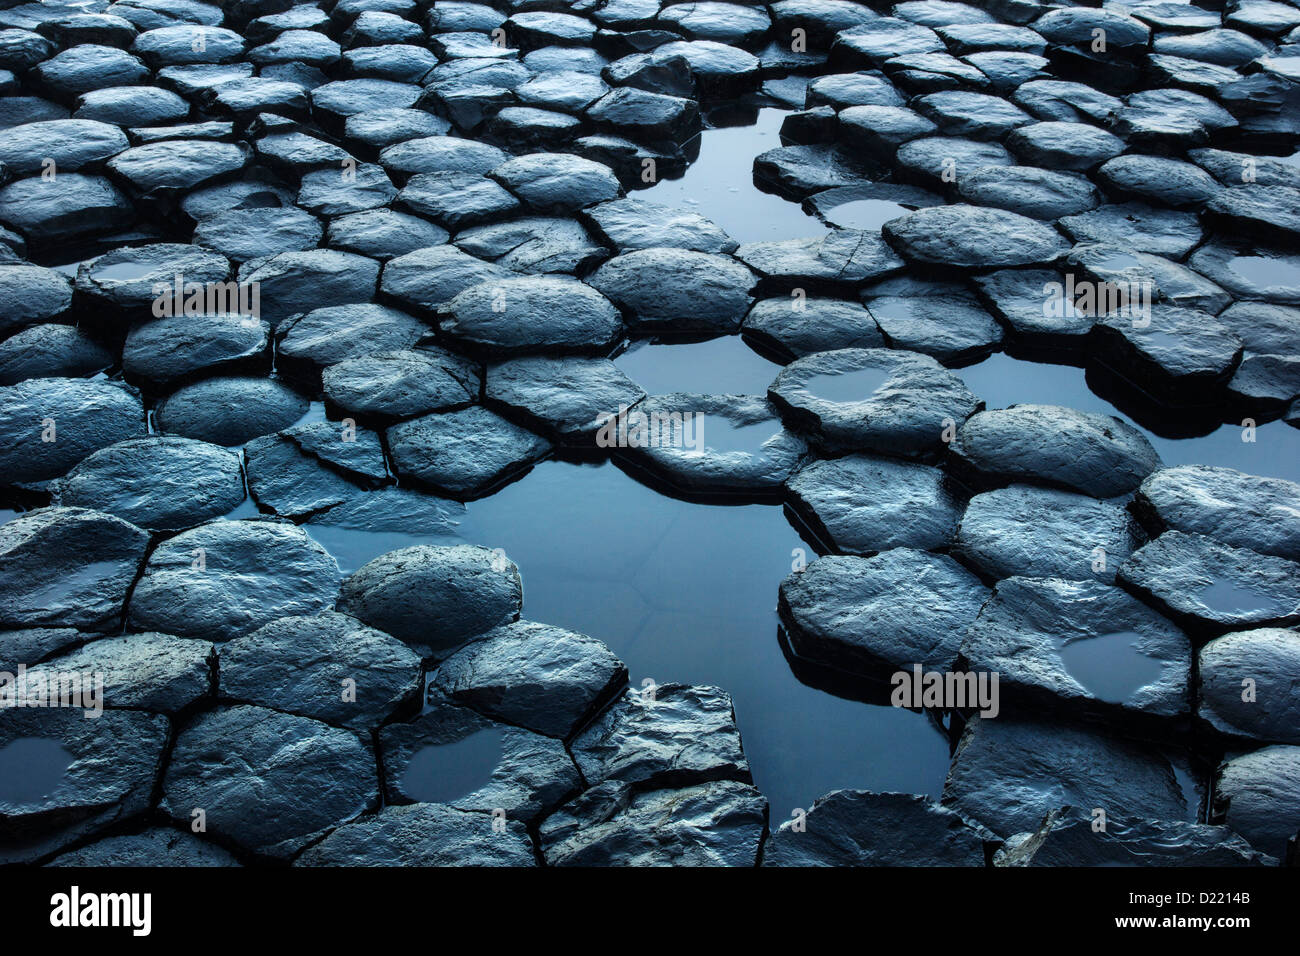 Details of the hexagonal basaltic rocks pattern from the famous Giant's Causeway UNESCO world heritage site in Northern Ireland. Stock Photo